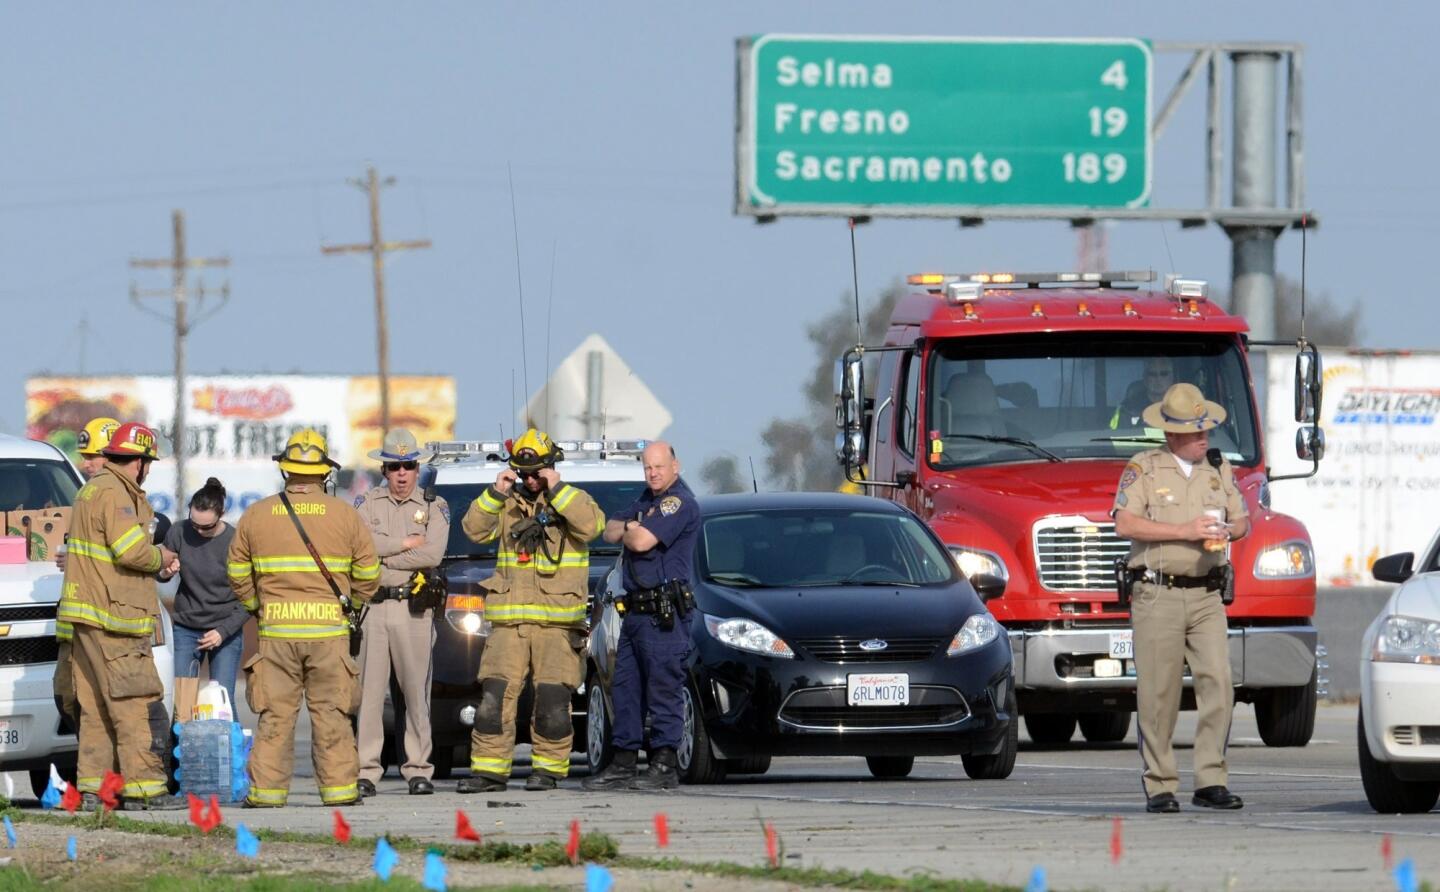 The scene at State Route 99, where two California Highway Patrol officers were killed in a vehicle accident in Kingsburg, south of Fresno.